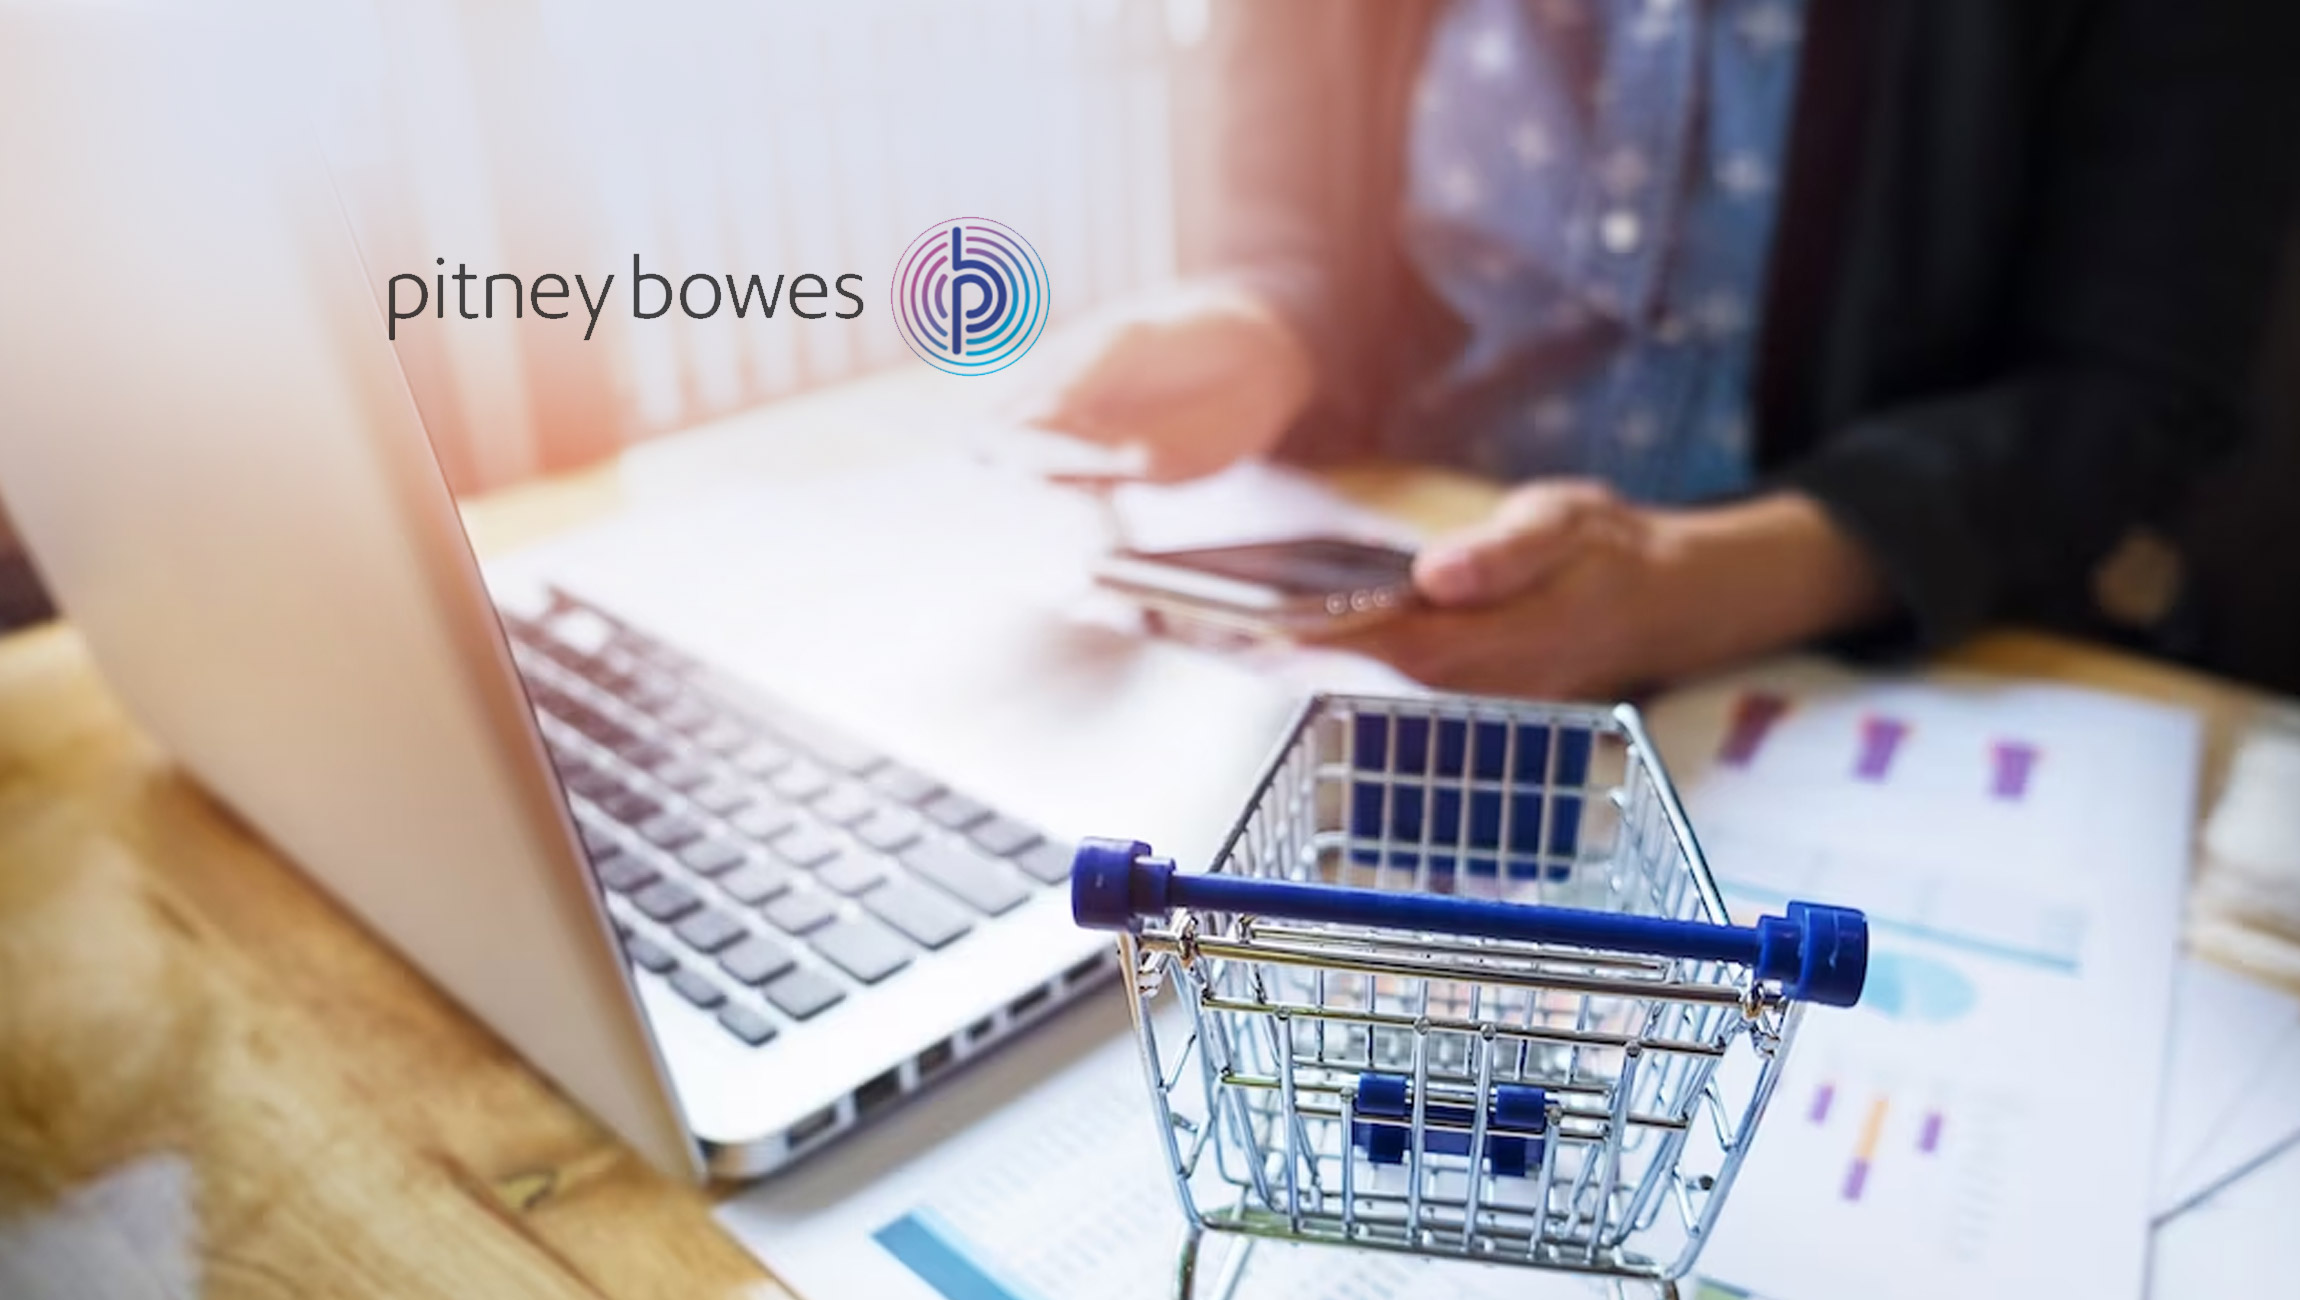 Pitney-Bowes-Releases-Order-Experience-Index-to-Help-Direct-to-Consumer-Retailers-Navigate-Post-Pandemic-Market